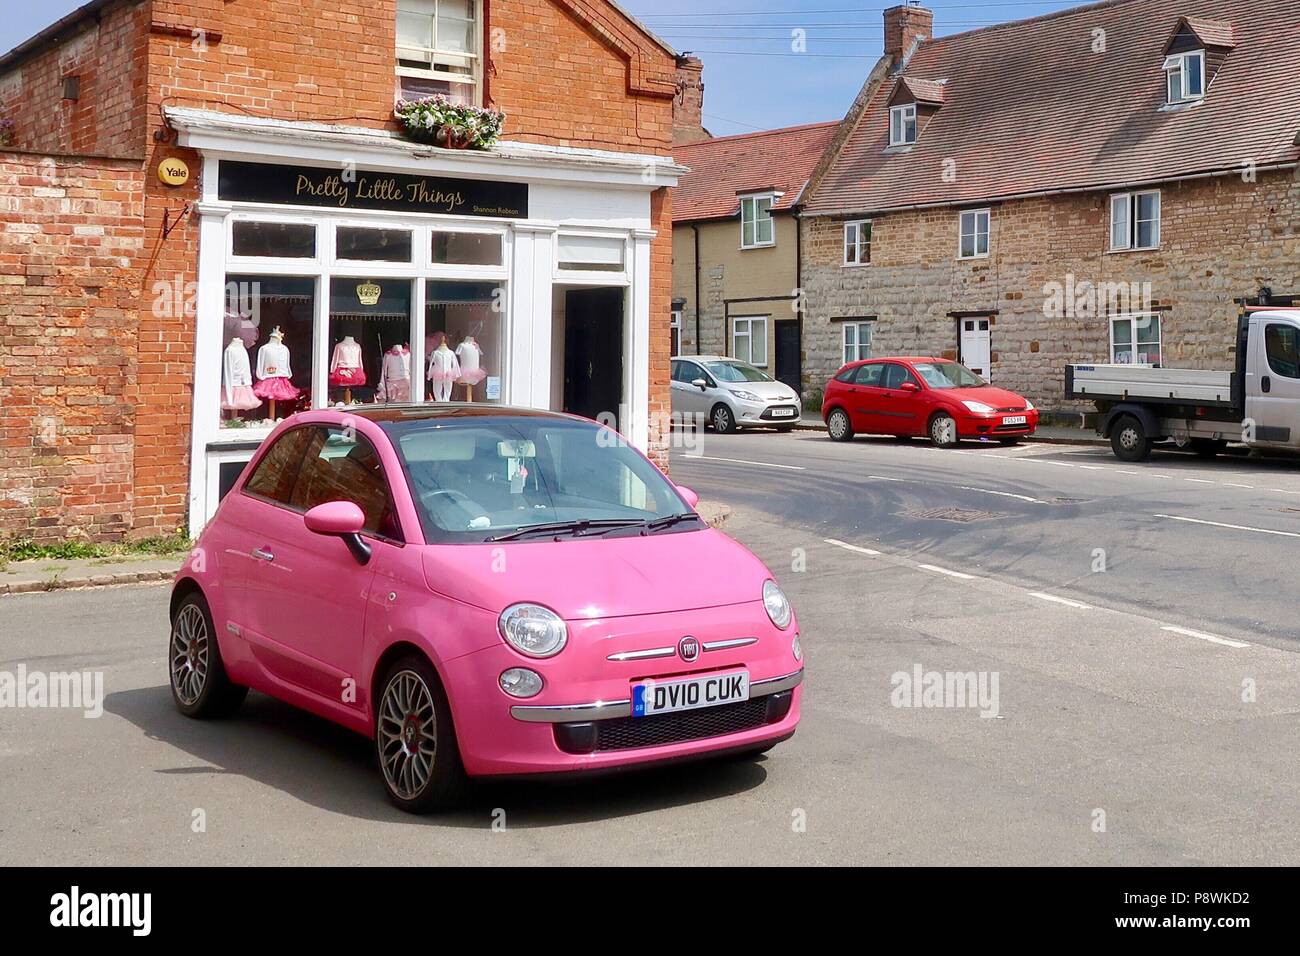 Bright Pink Fiat 500 In Front Of The Pretty Little Things Shop In Kineton Warks Stock Photo Alamy